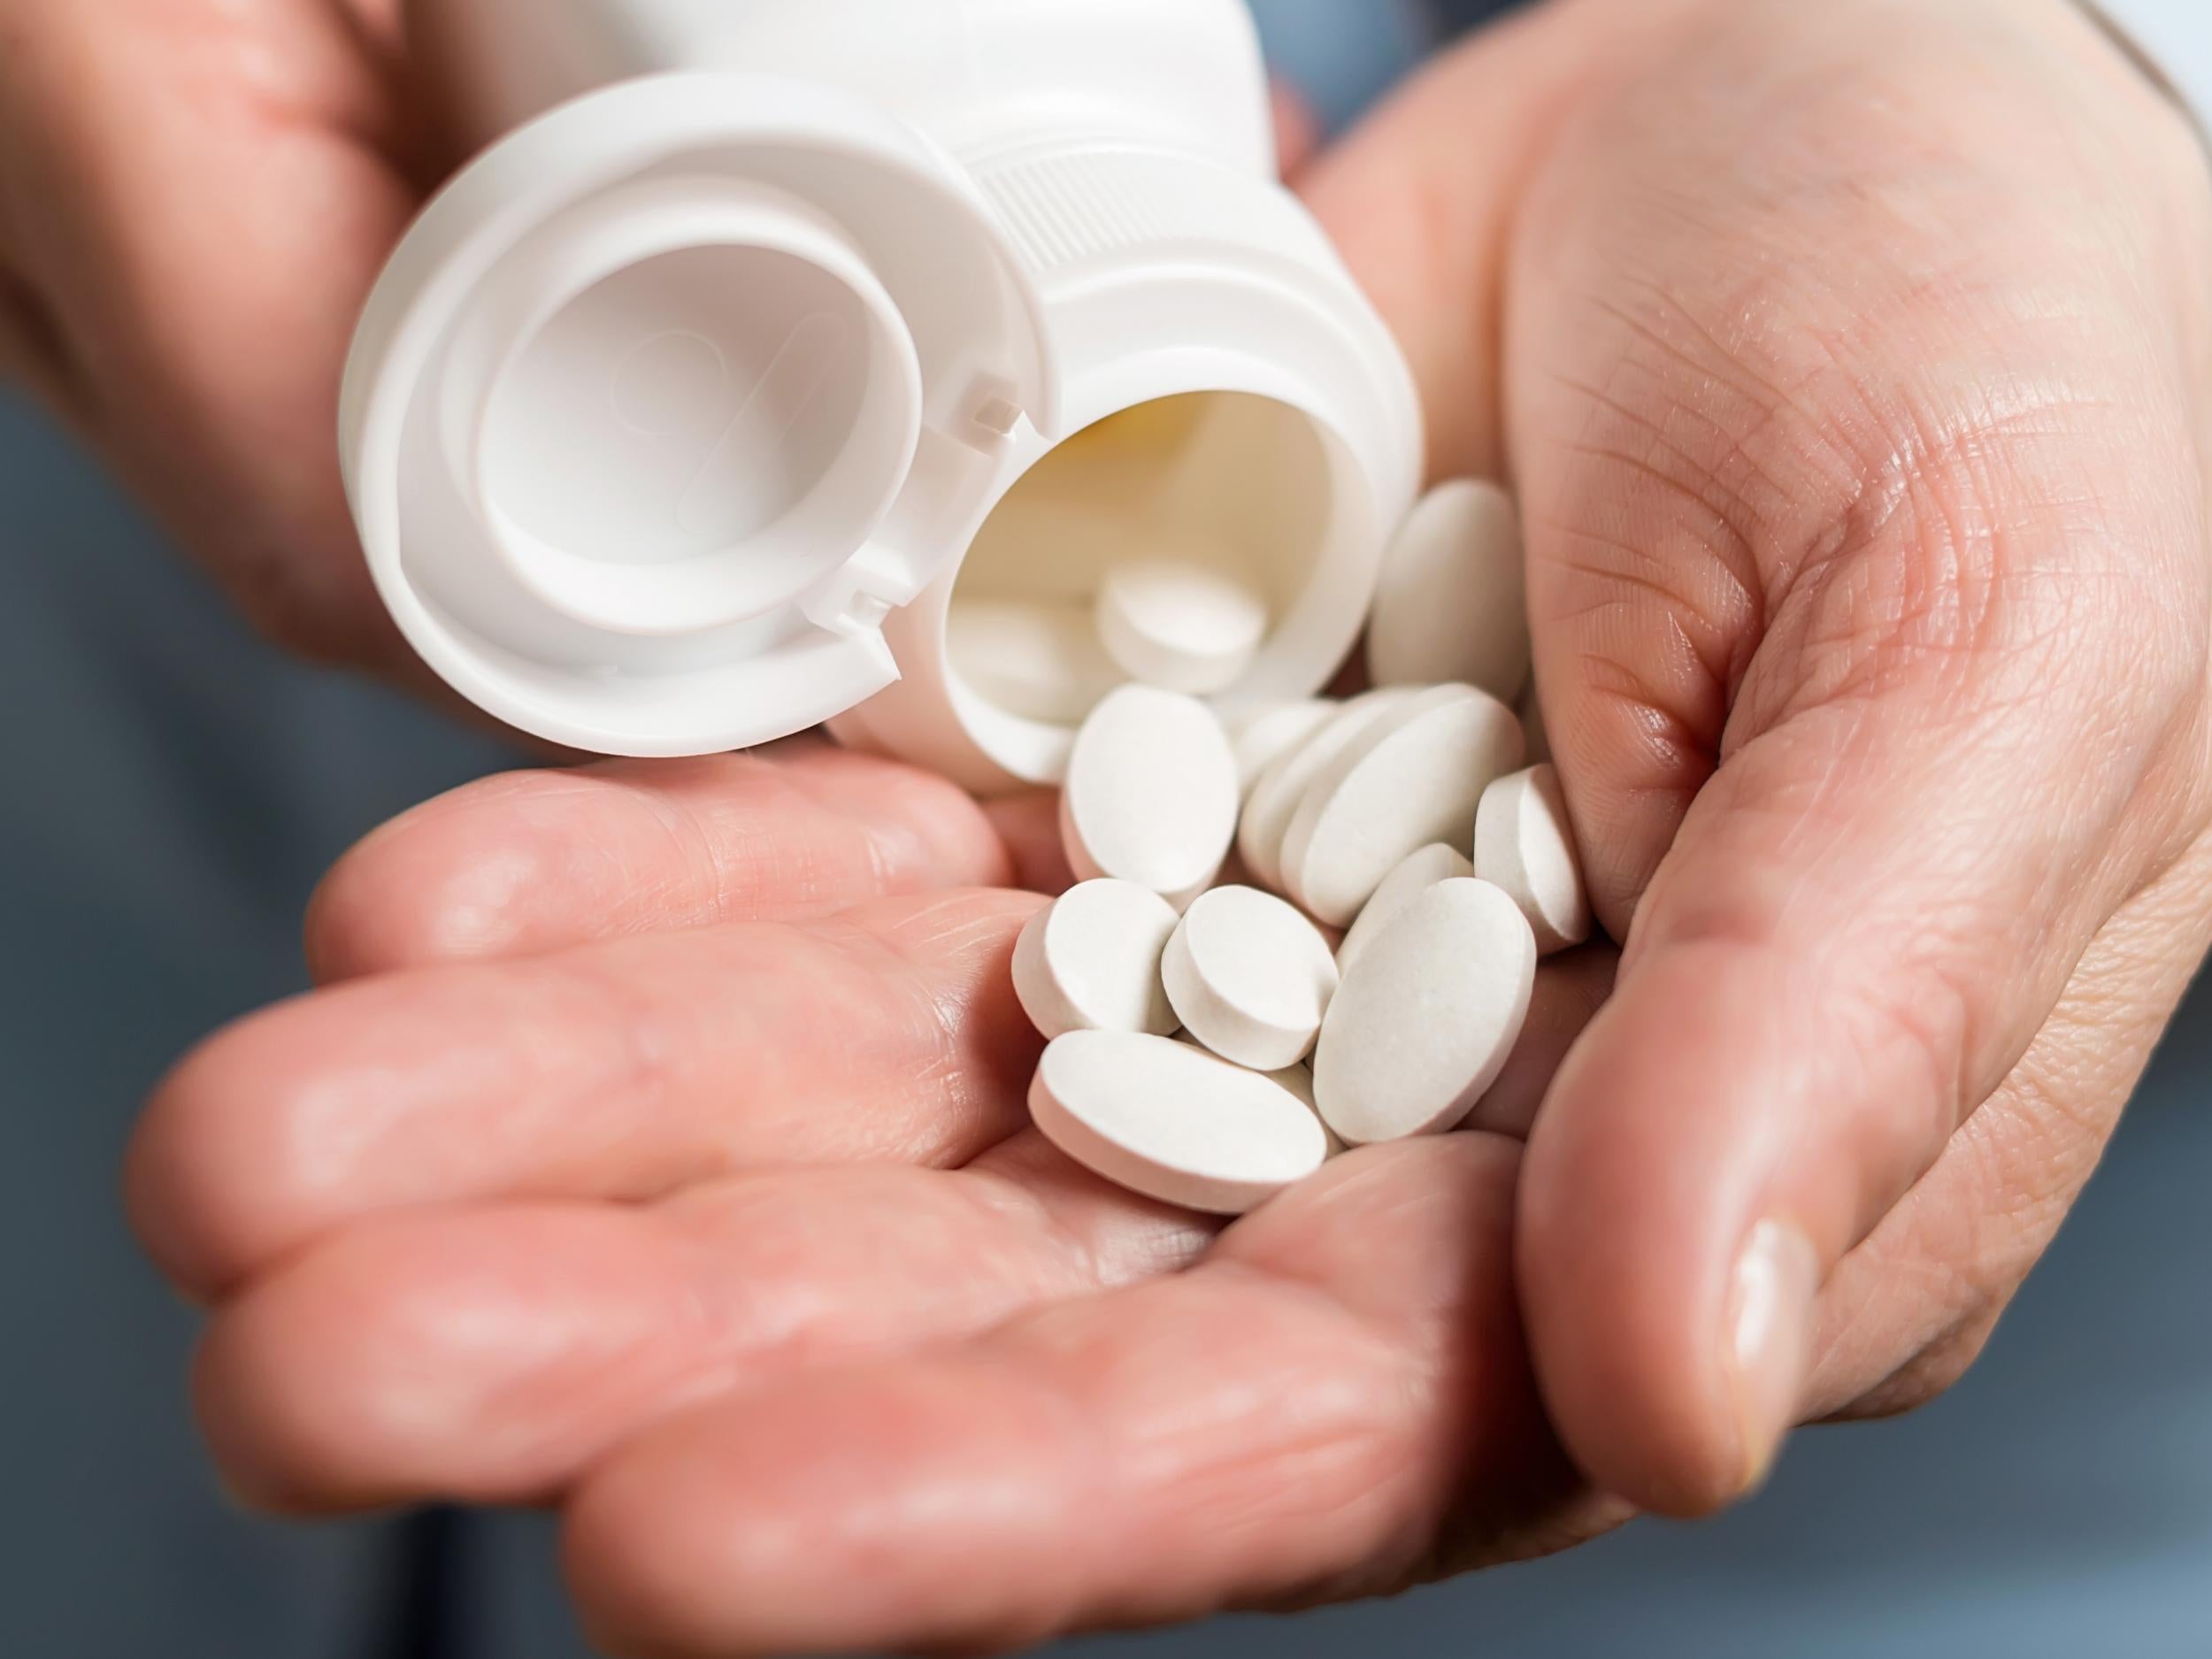 Sleep retailers offer magnesium supplements as one solution